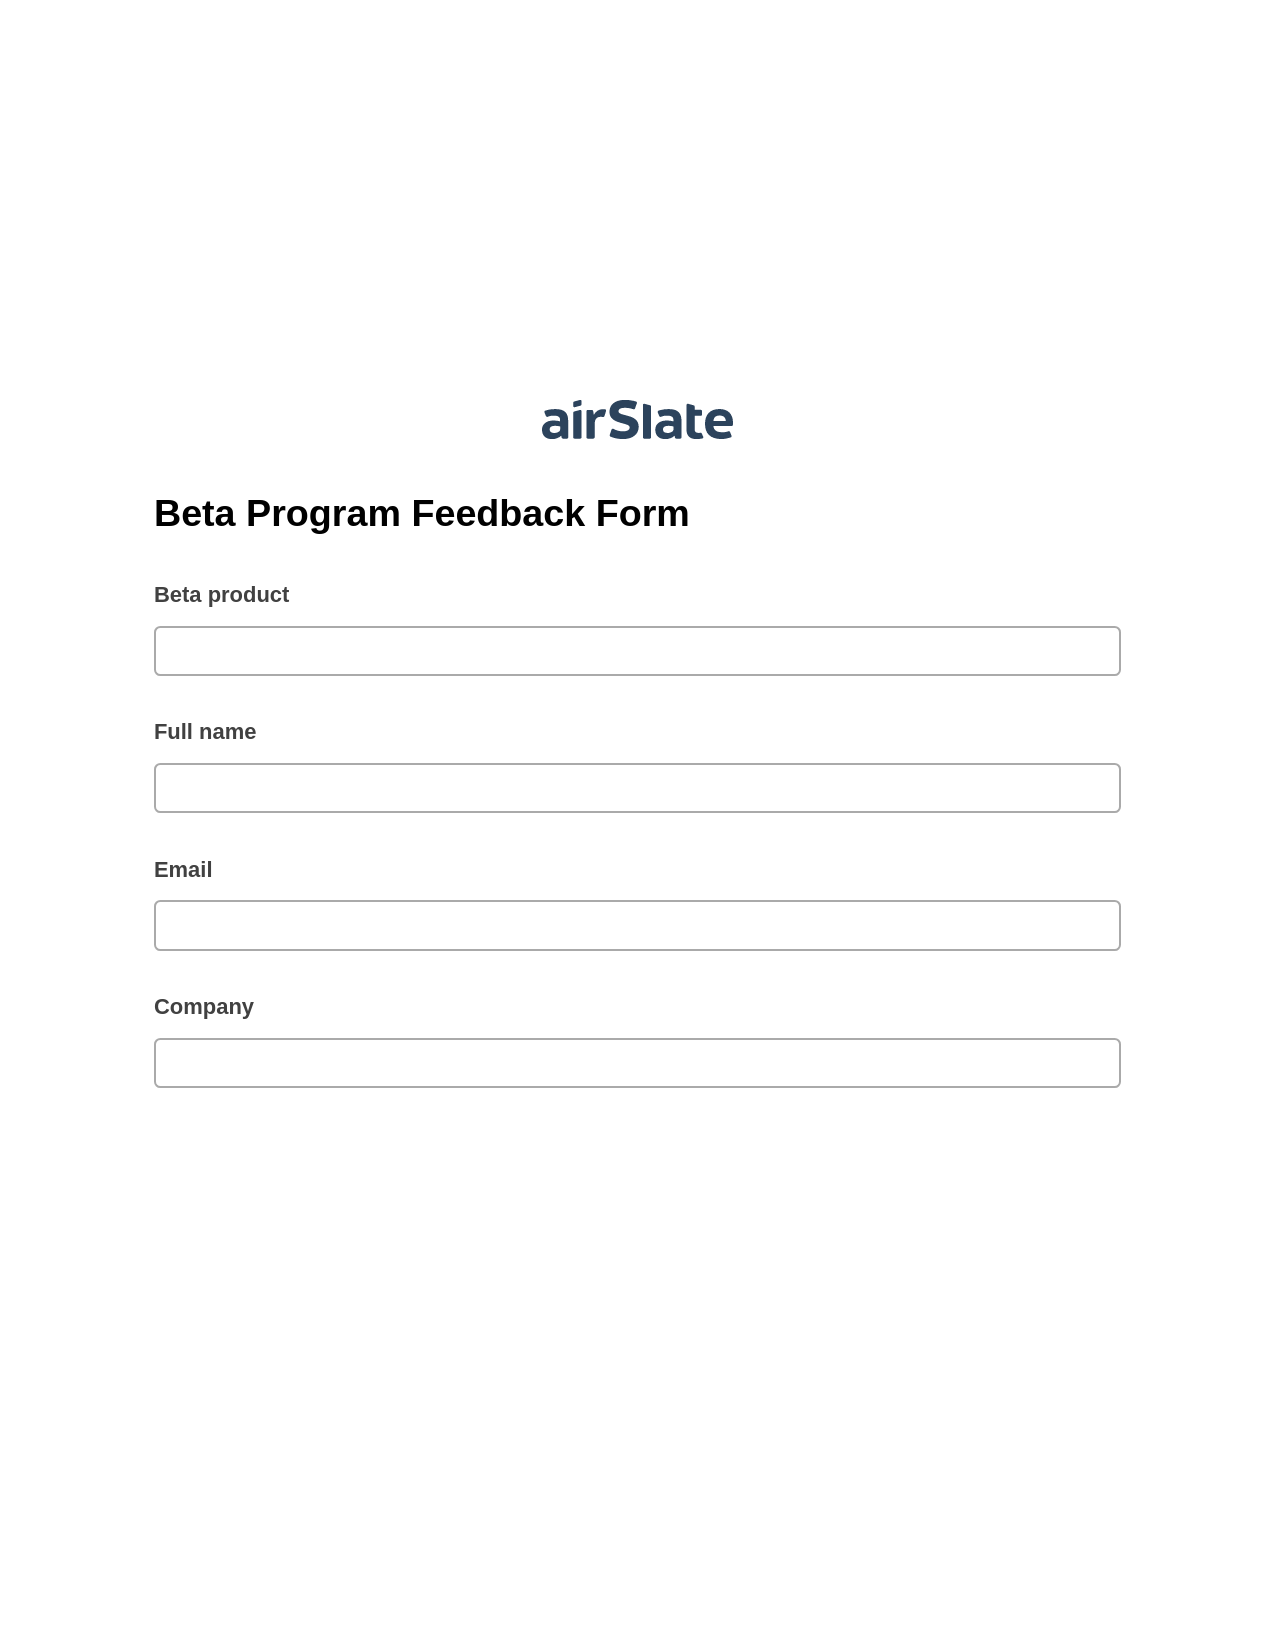 Multirole Beta Program Feedback Form Pre-fill from Excel Spreadsheet Bot, Email Notification Bot, Export to Formstack Documents Bot